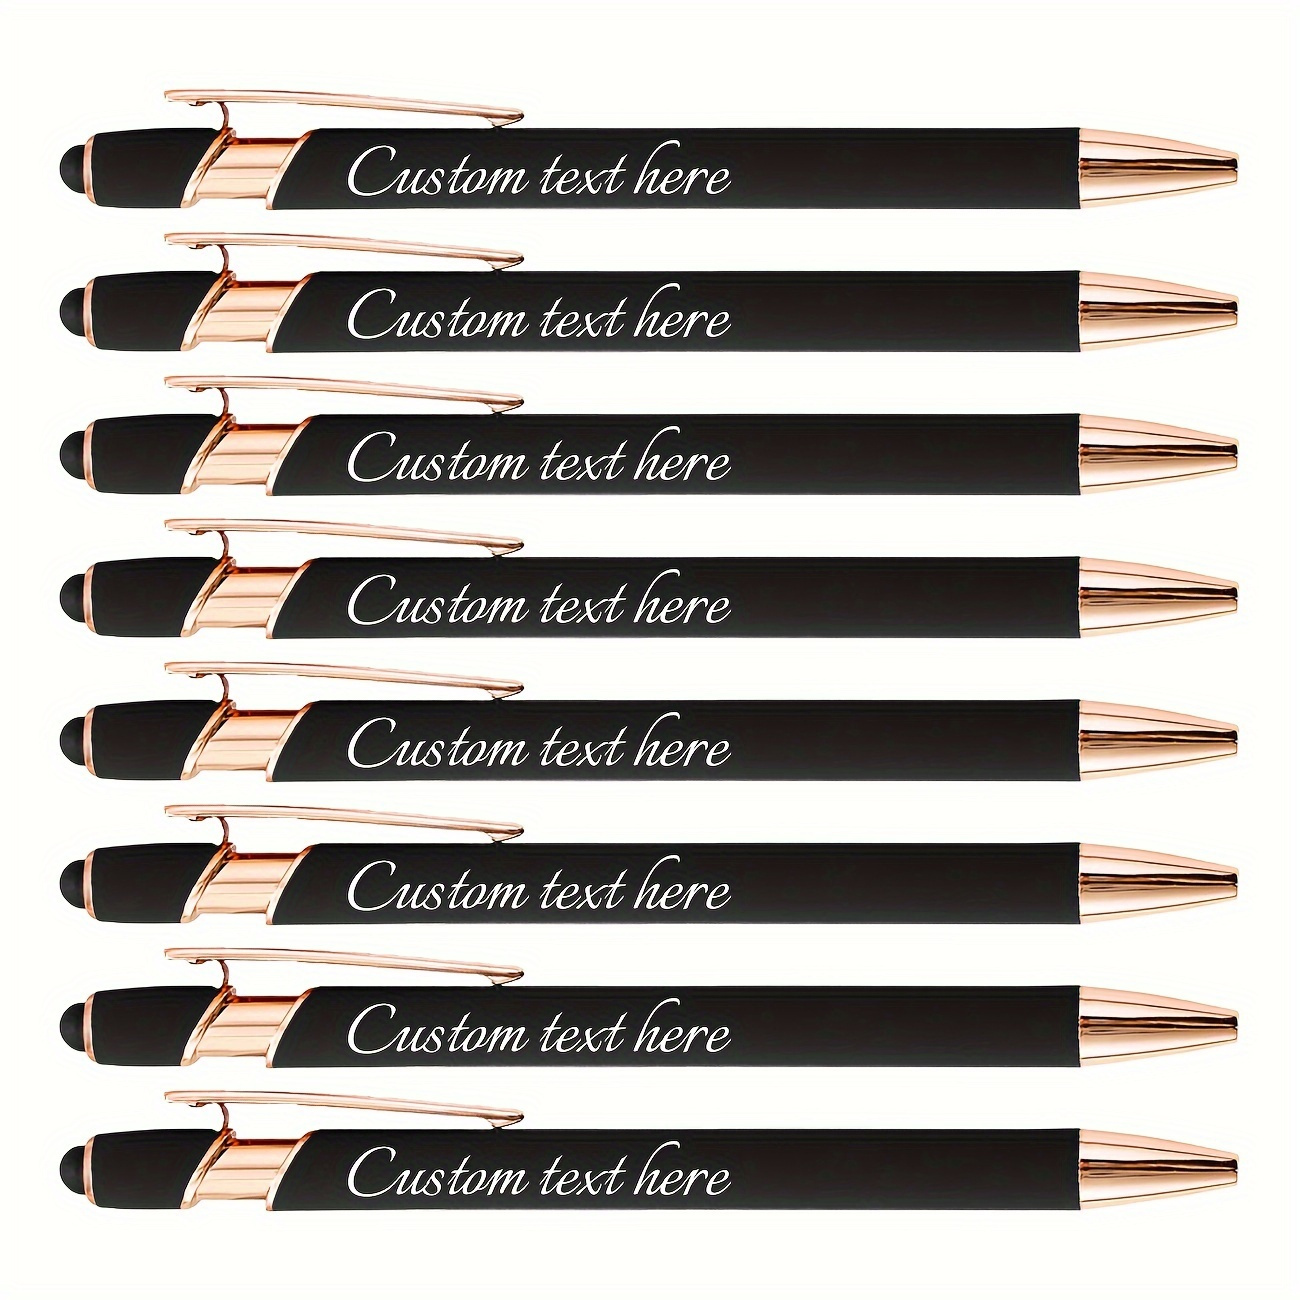 

30/60/90pcs Customized Black Ballpoint Pens With Laser Engraved Personalized Letters And Sentences. Multi-functional Writing Pen, Stationery, Souvenir, Gift, Craft.